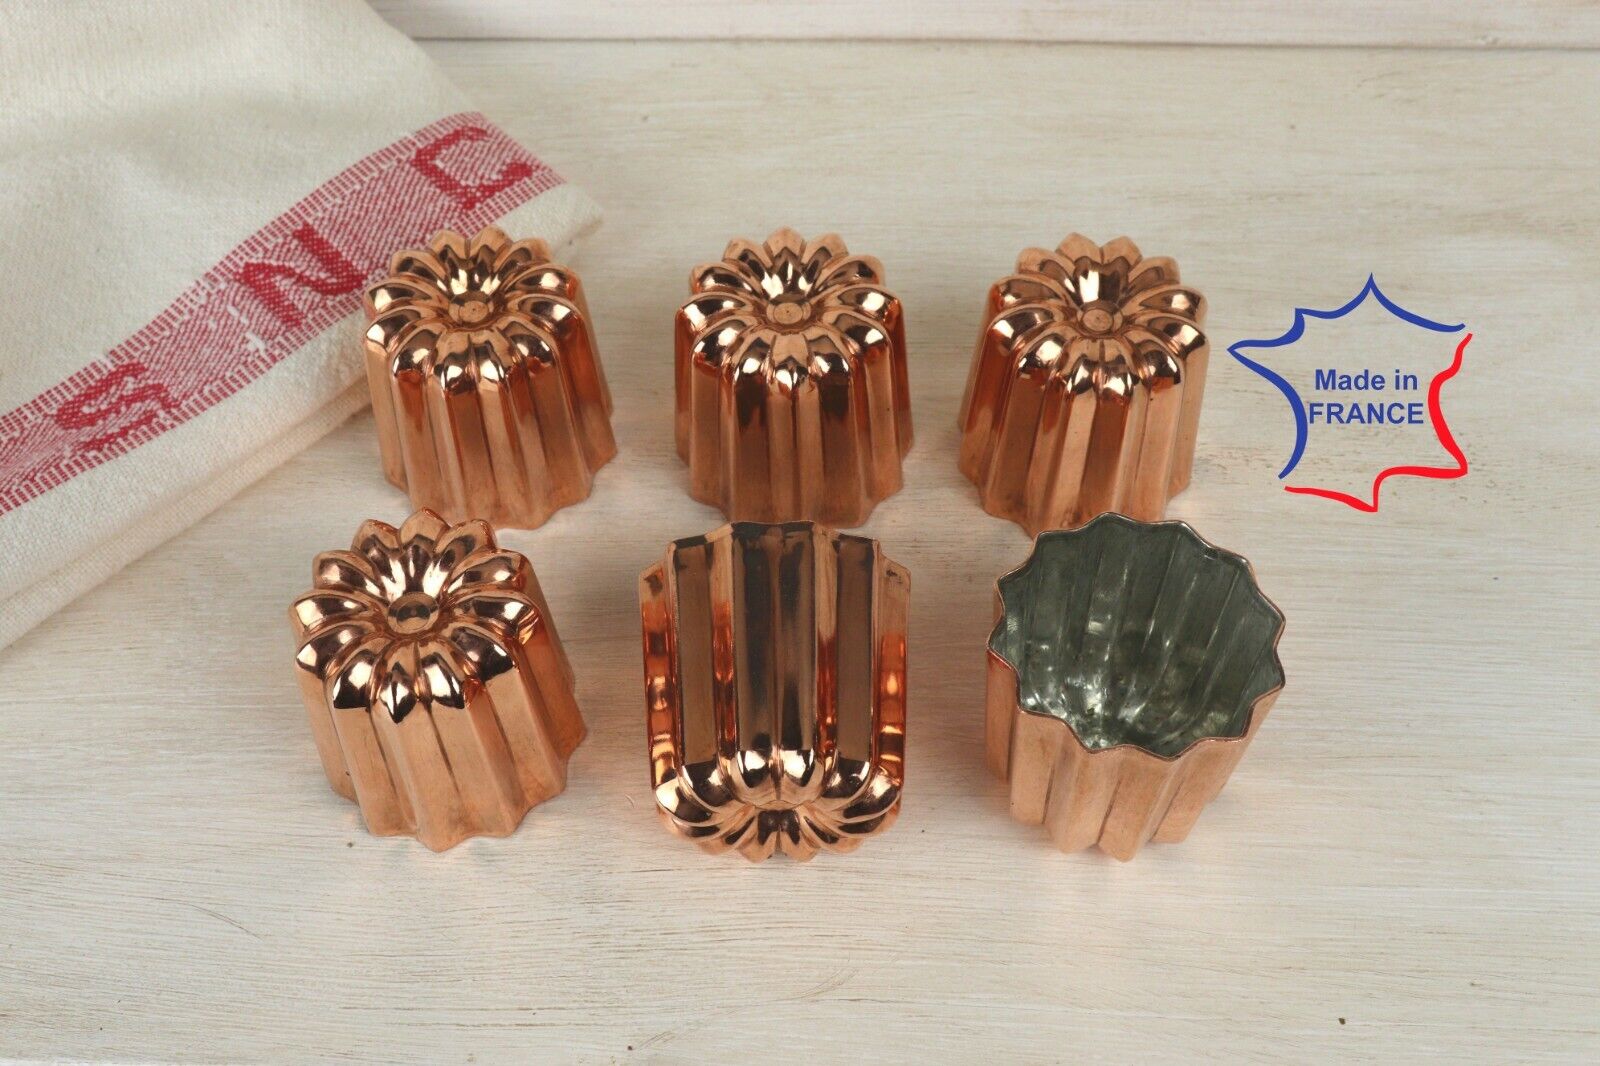 6 Copper canele molds Large 2.1 inches 6 Copper Cannele made in France